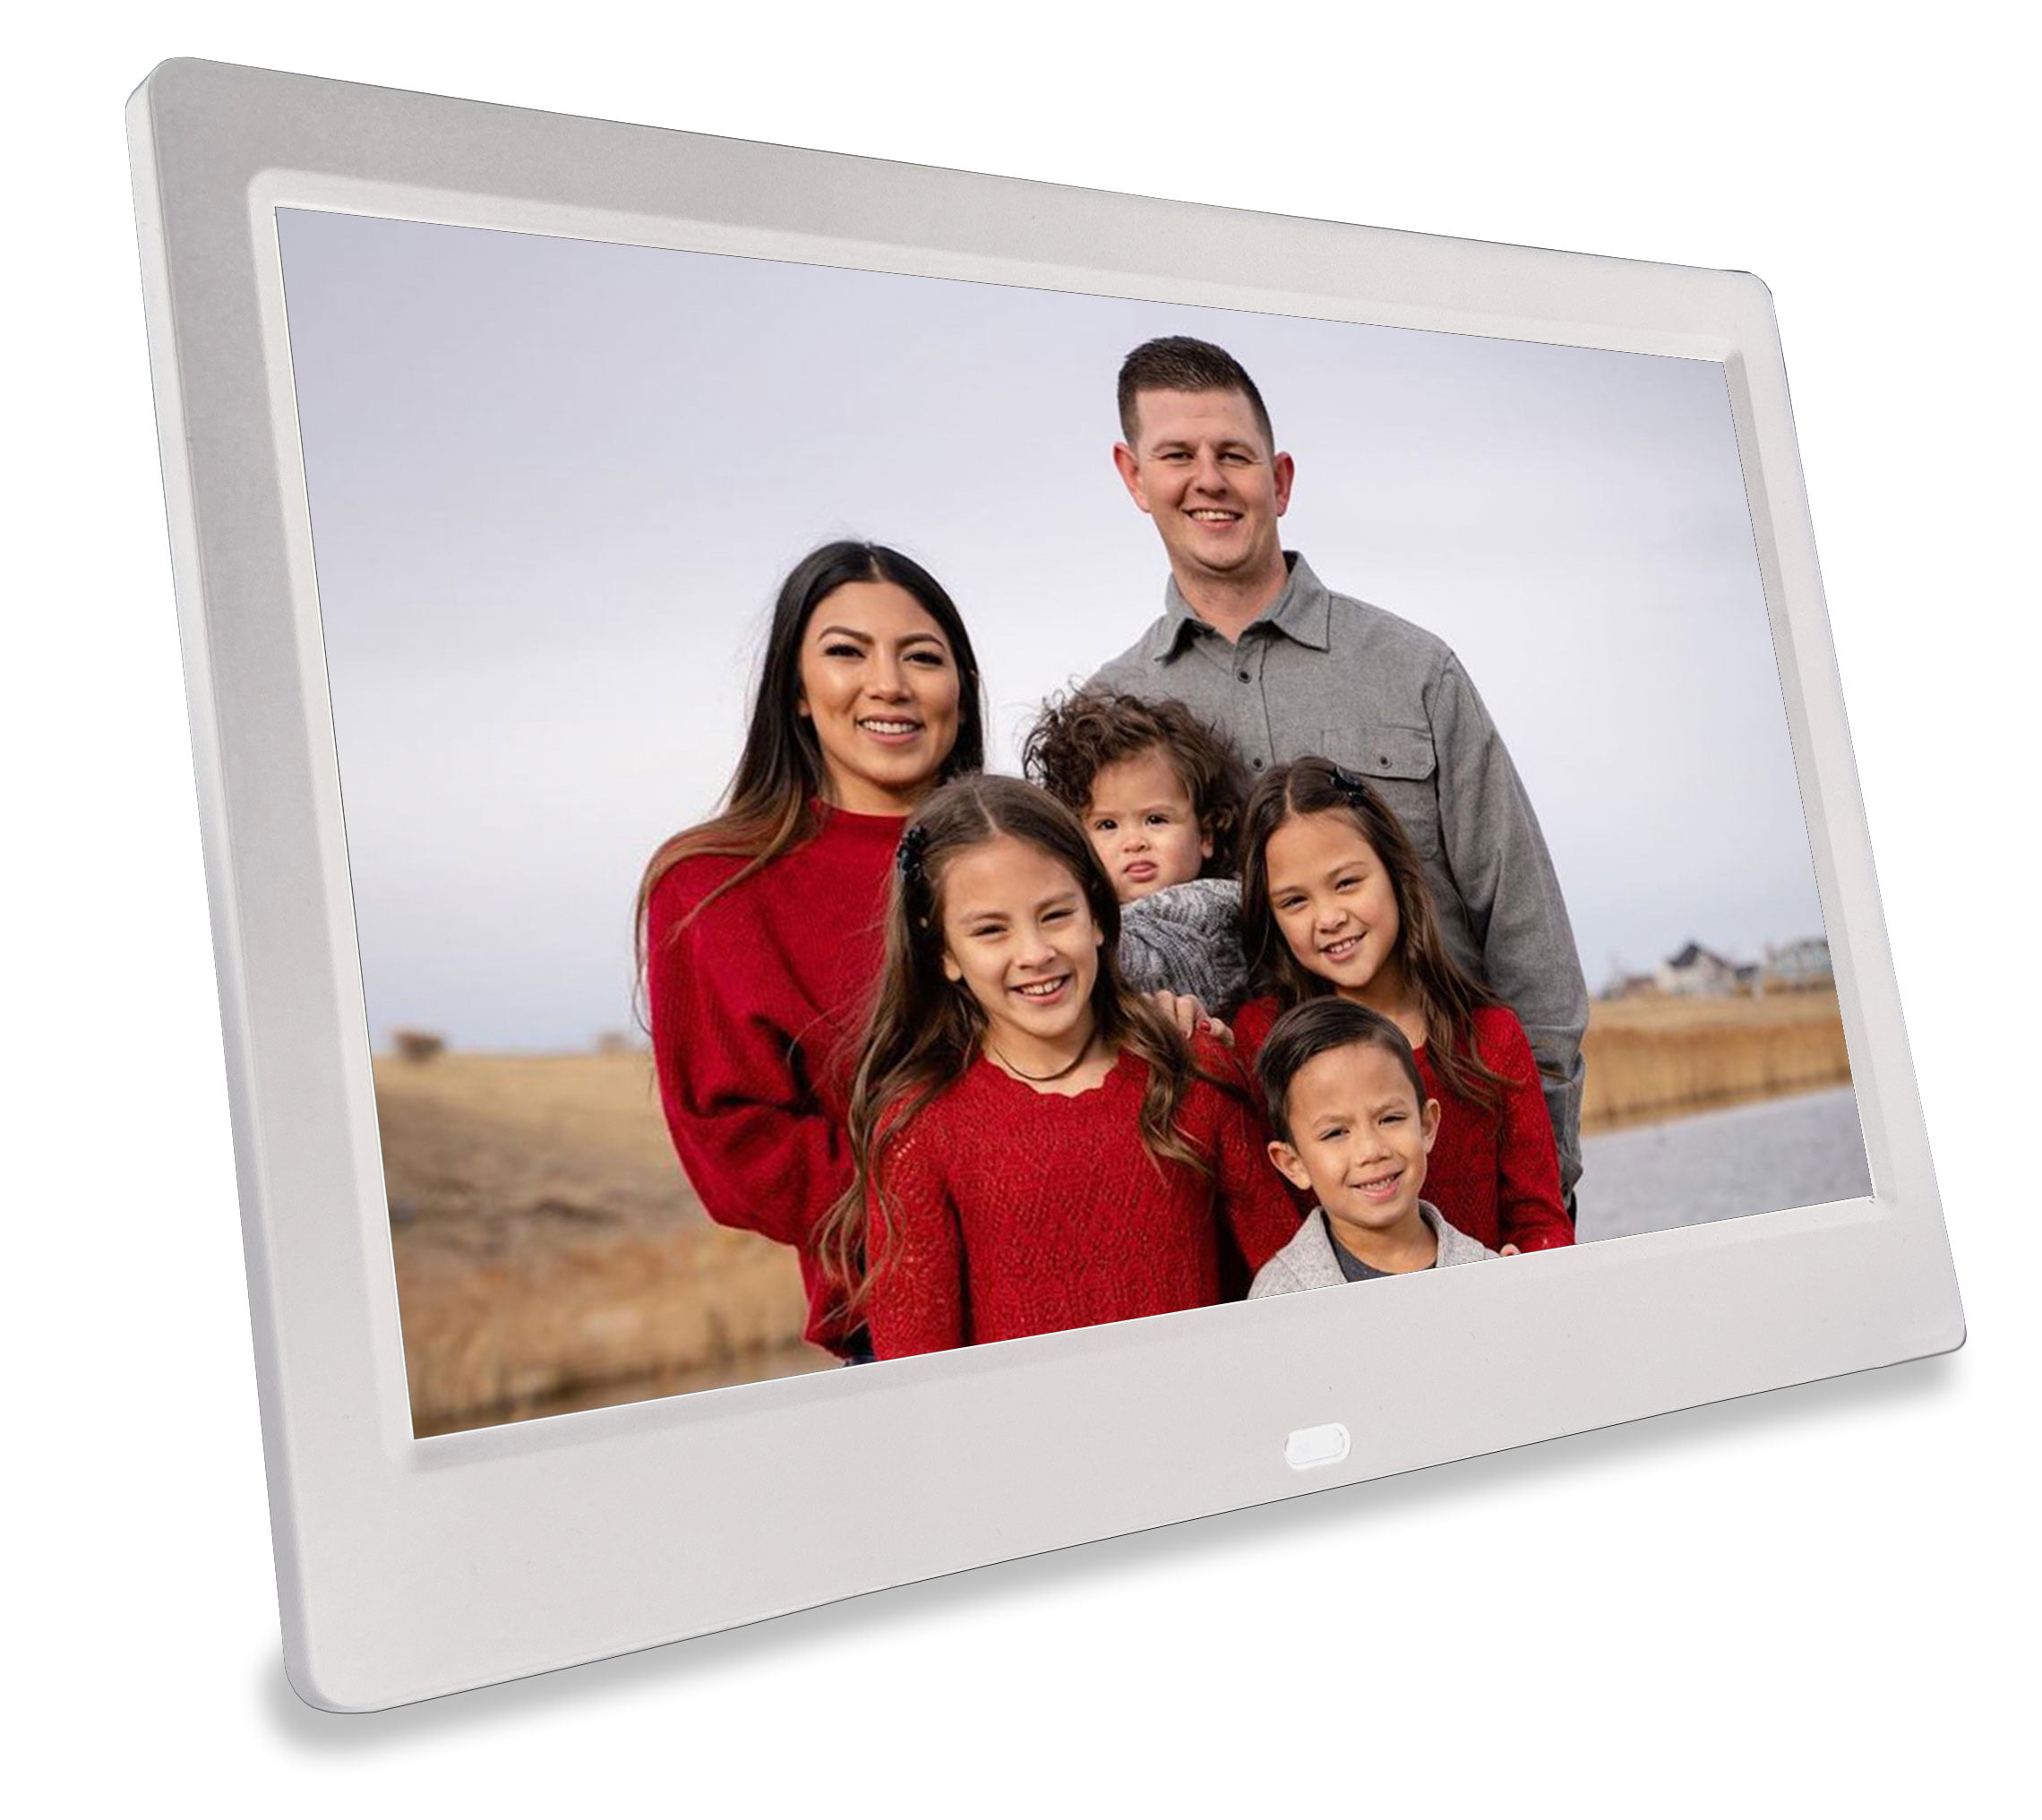 No WiFi No Account Phone2Frame 10 Inch Digital Picture Frame White Uses The Photo Backup Stick to Get from Phone or Computer to Frame 64GB